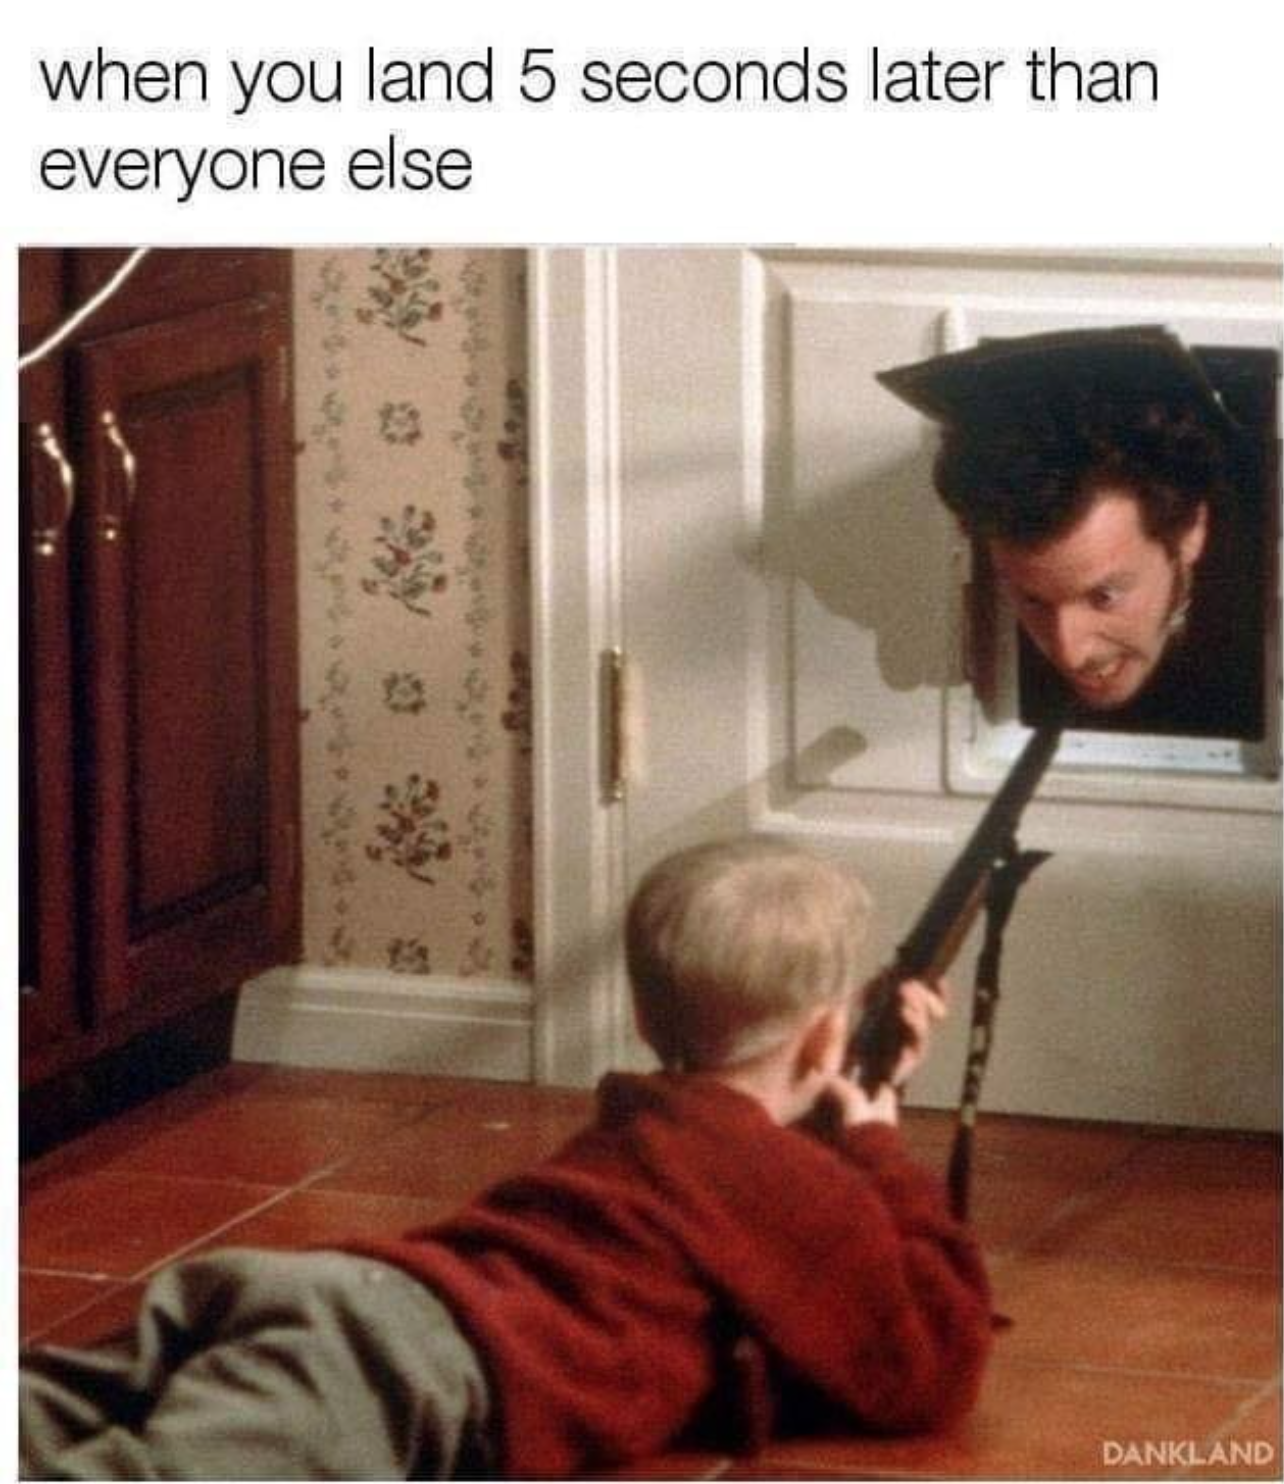 funny gaming memes  - home alone - when you land 5 seconds later than everyone else Dankland